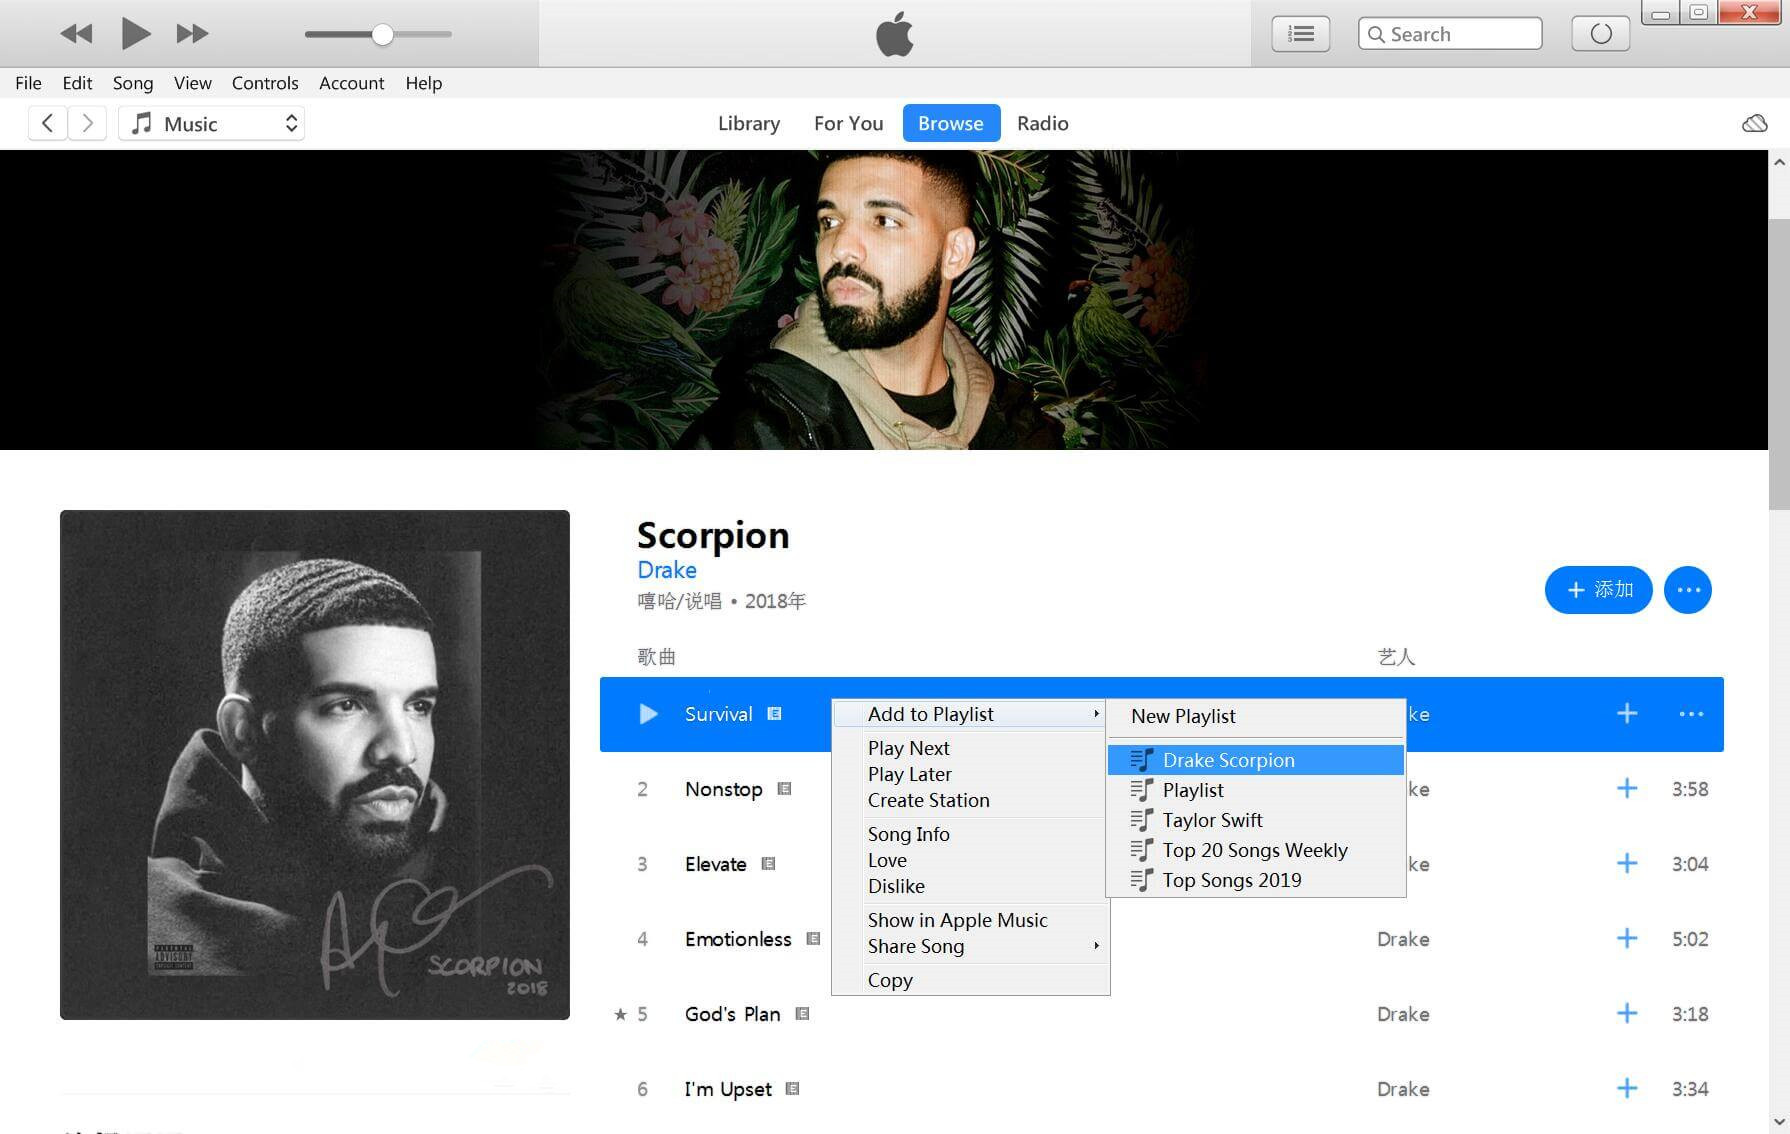 add drake's scorpion playlist to itunes library